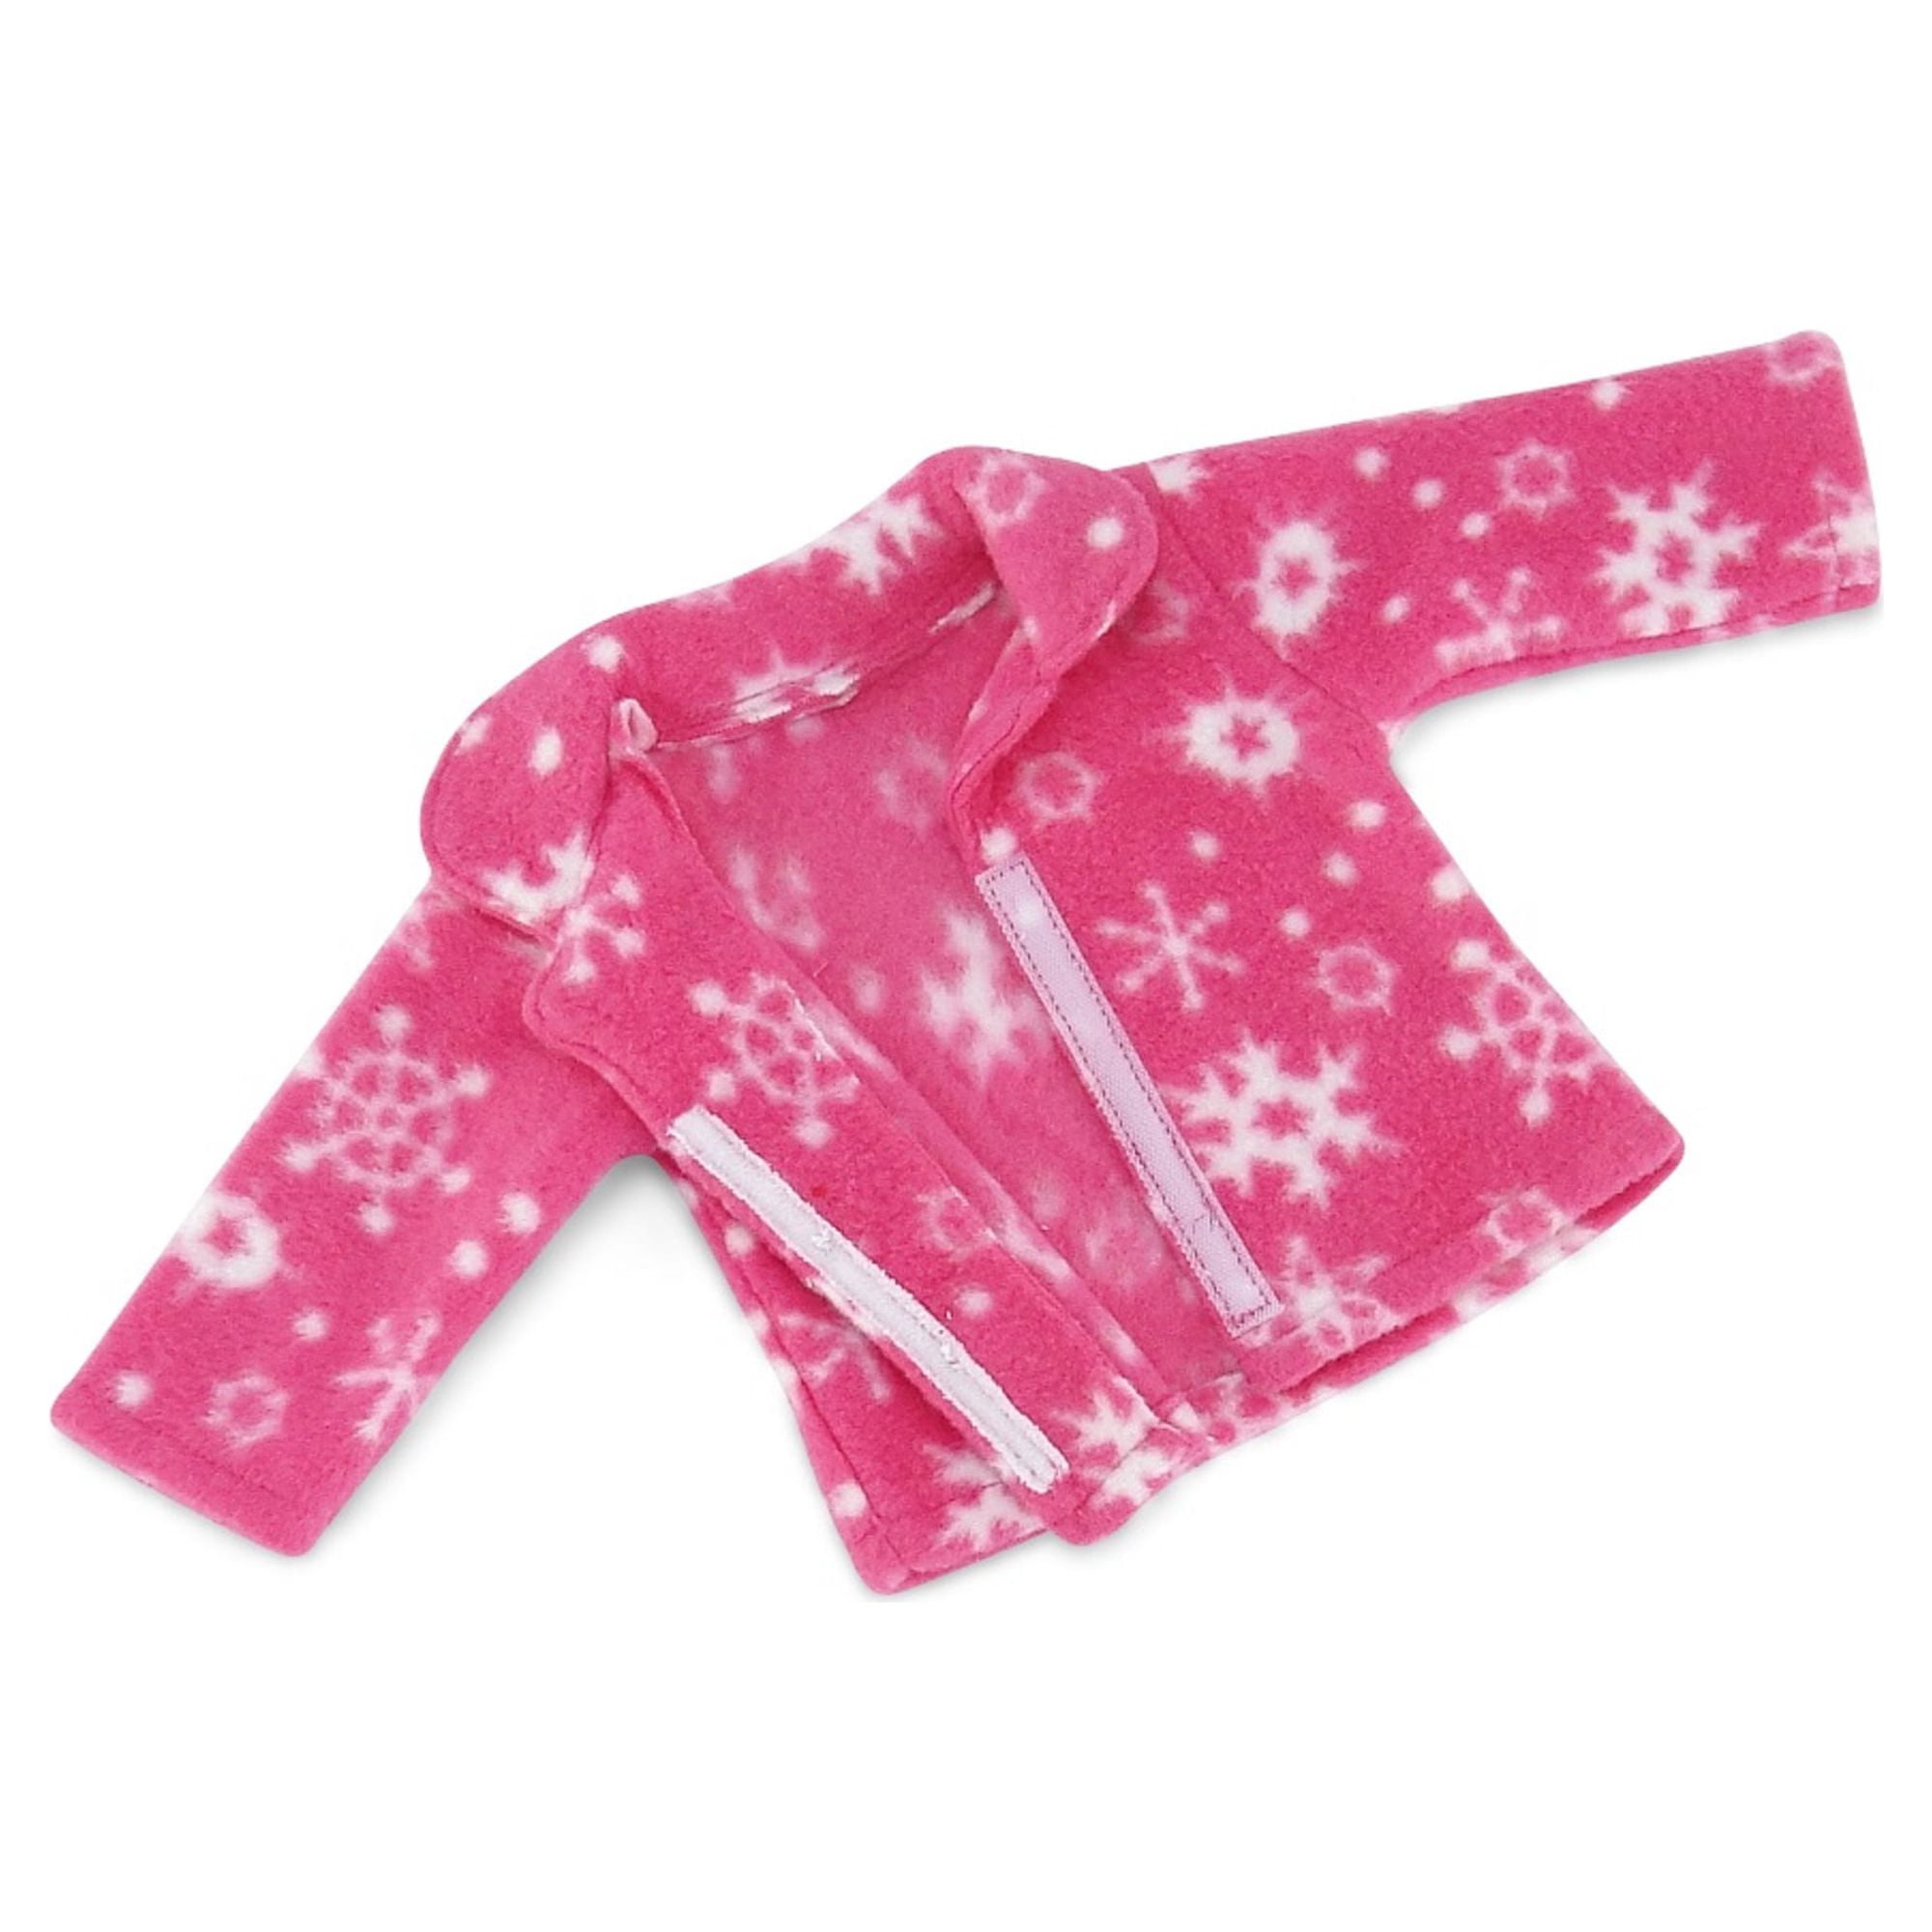 Emily Rose 18 Inch Doll Clothes Clothing Accessories - 2 Piece PJs